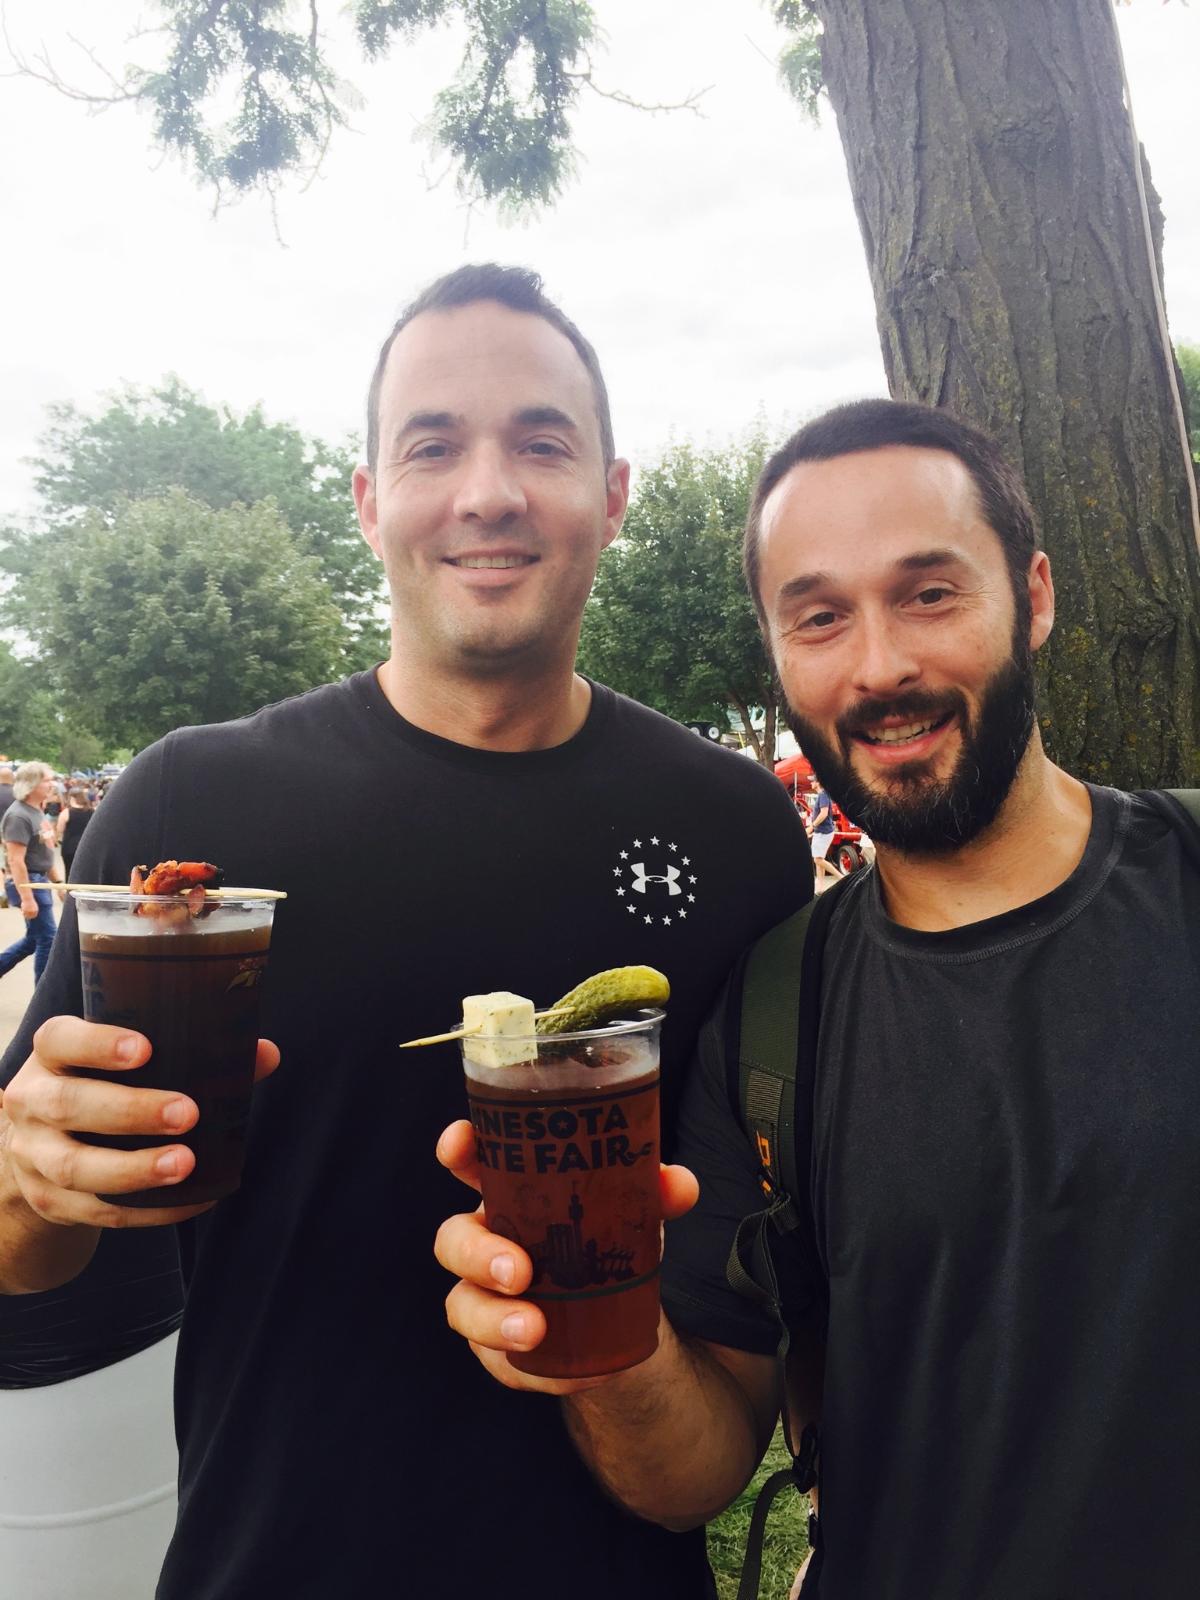 Minnesota state fair pic with my brother and I holding beers with pickle and bacon.